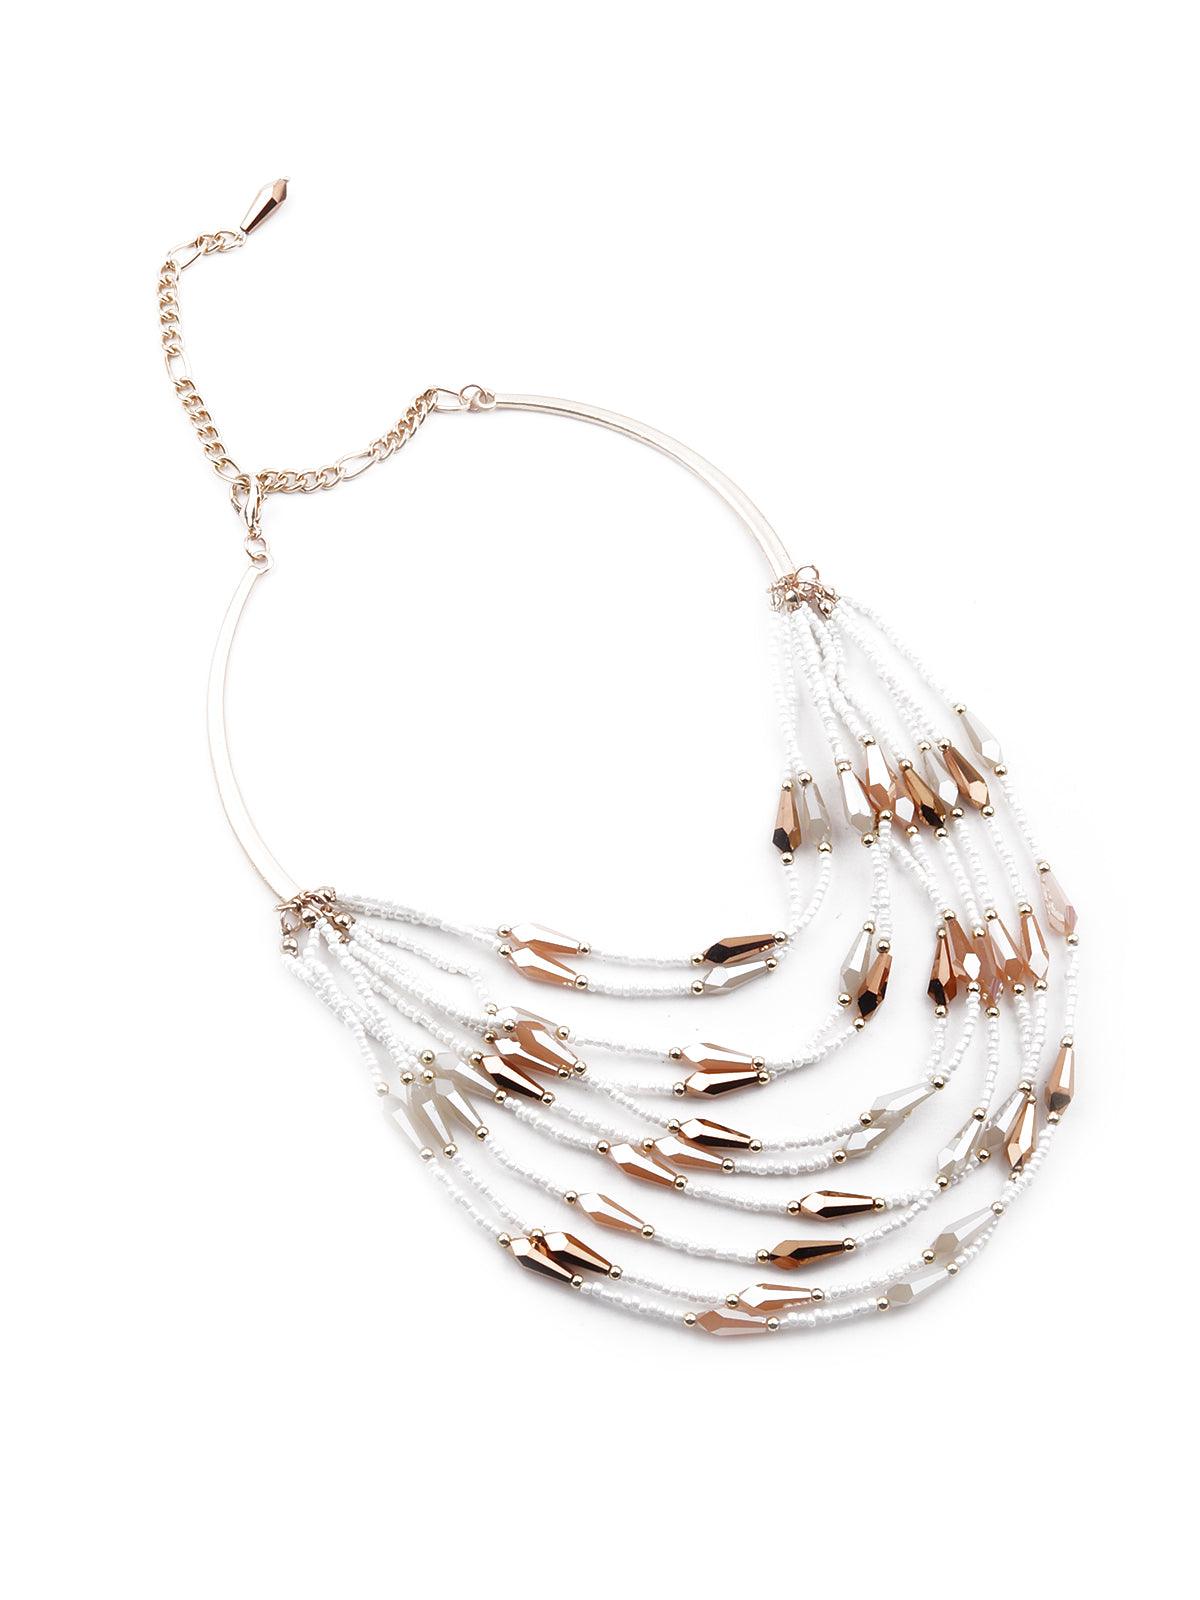 Women's White And Gold Layered Statement Necklace - Odette